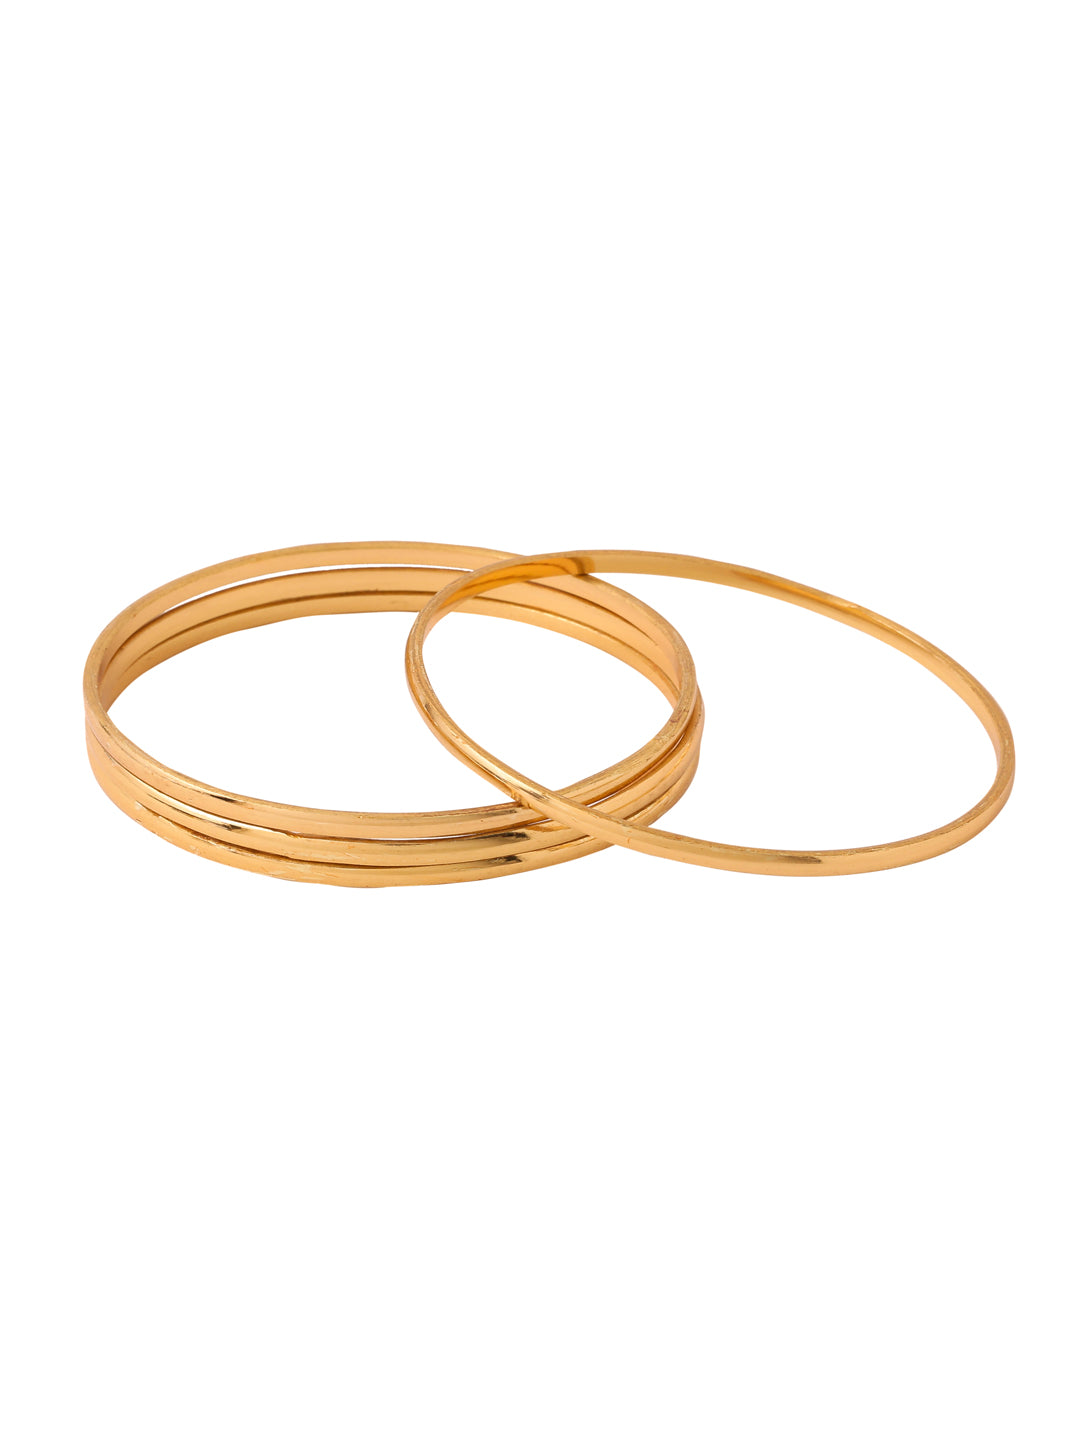 Women's Set Of 4 Gold-Plated Traditional Daily use Bangles - NVR